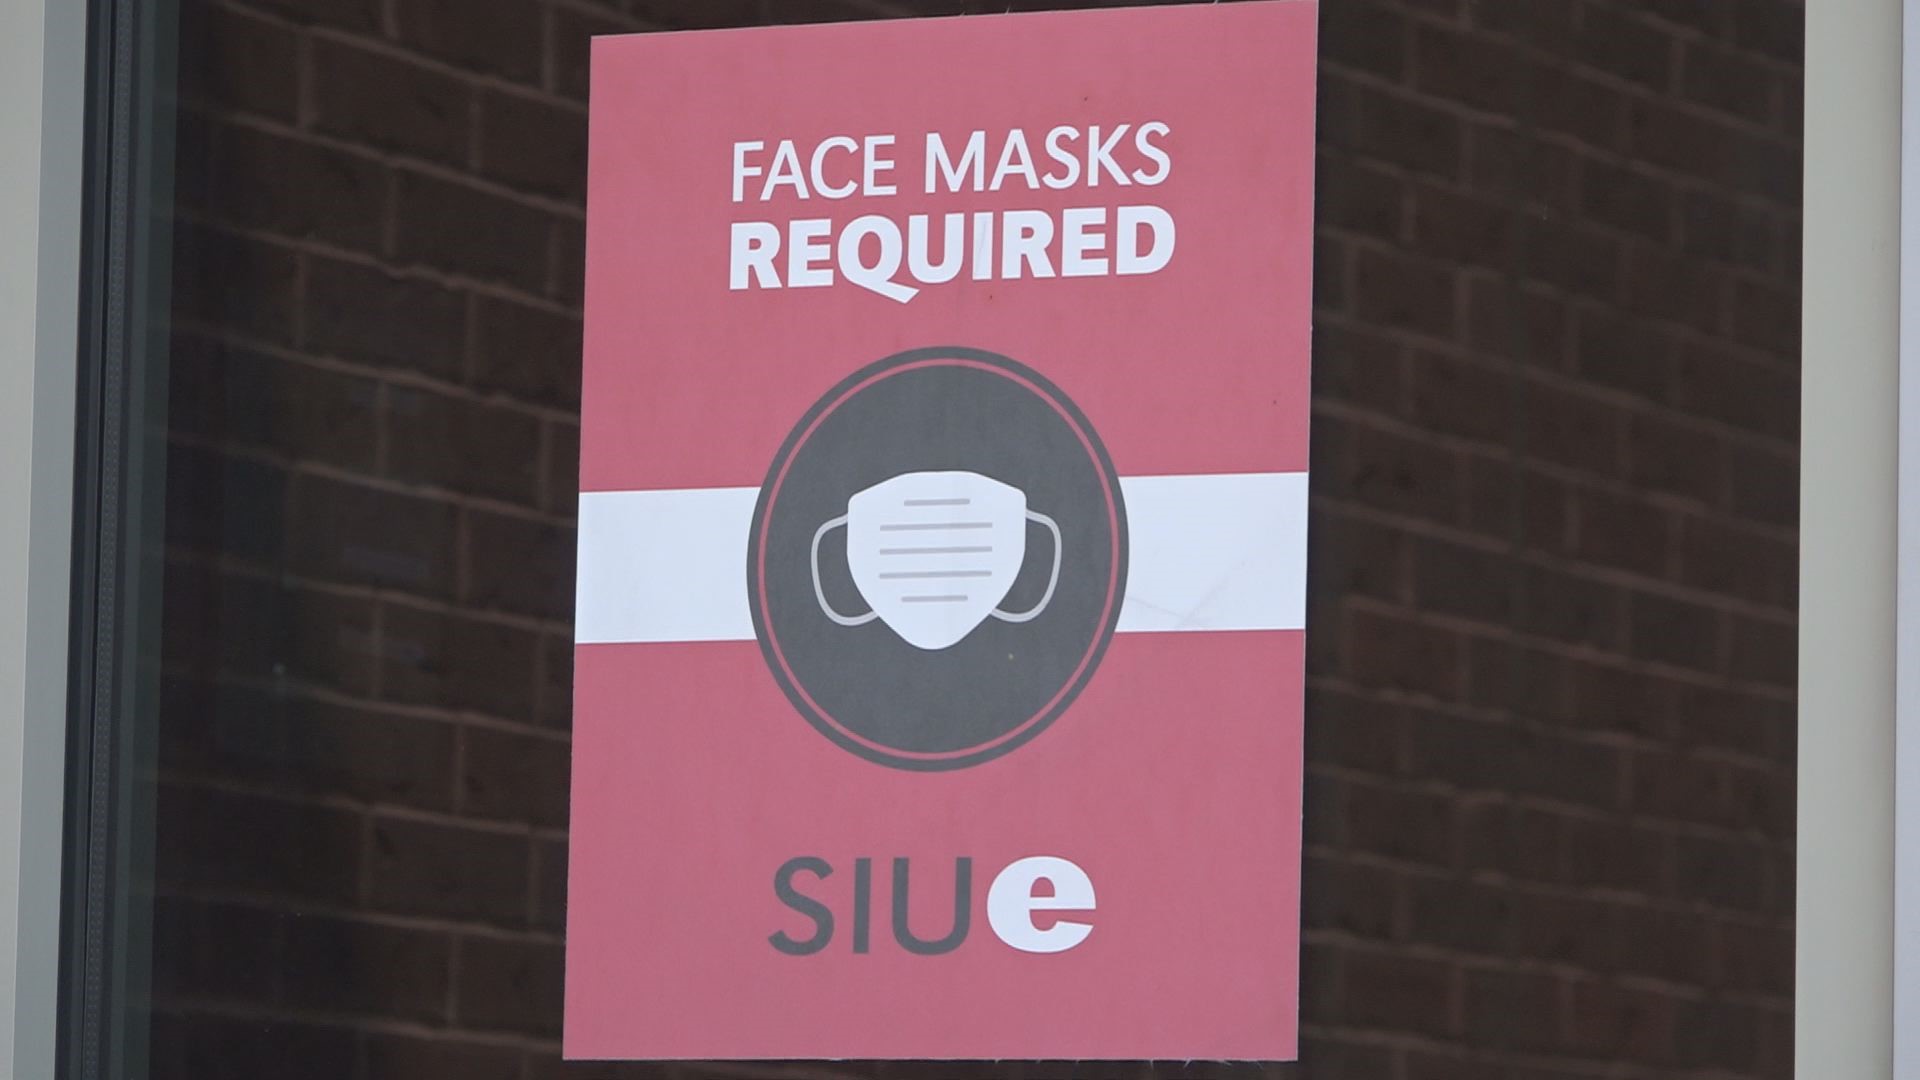 SIUE is asking students to get a vaccine and wear masks.